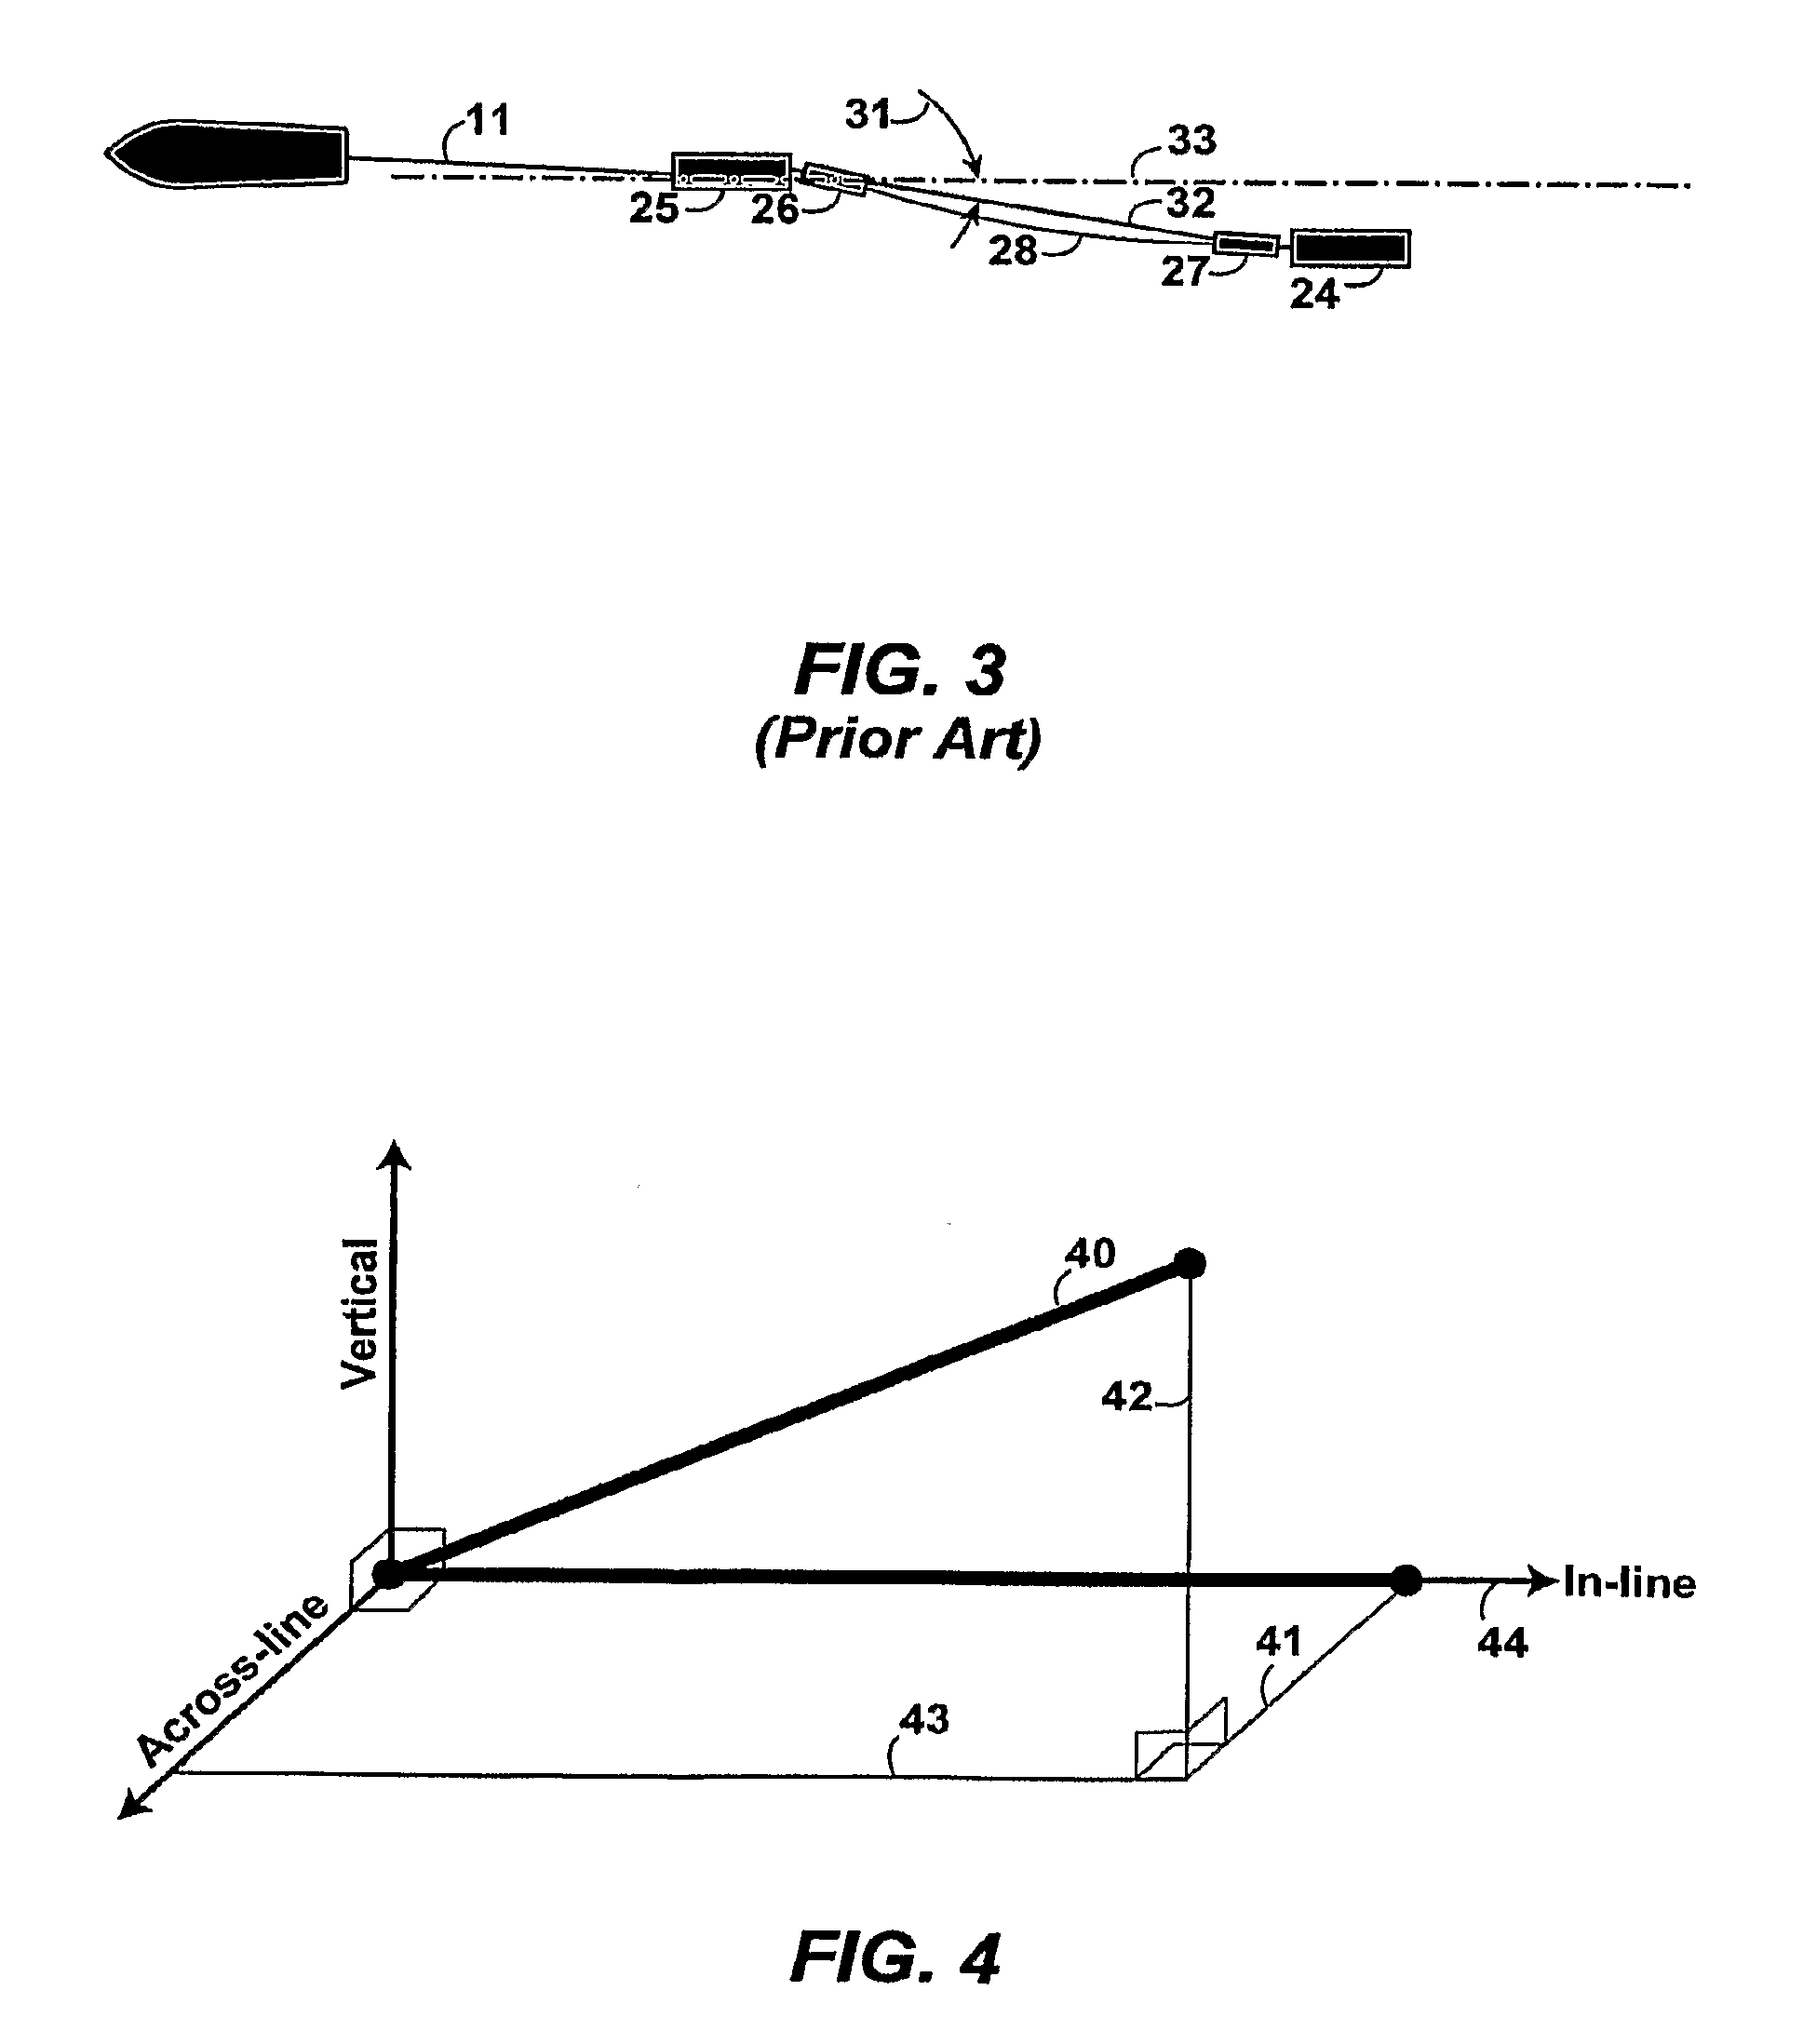 Method to maintain towed dipole source orientation